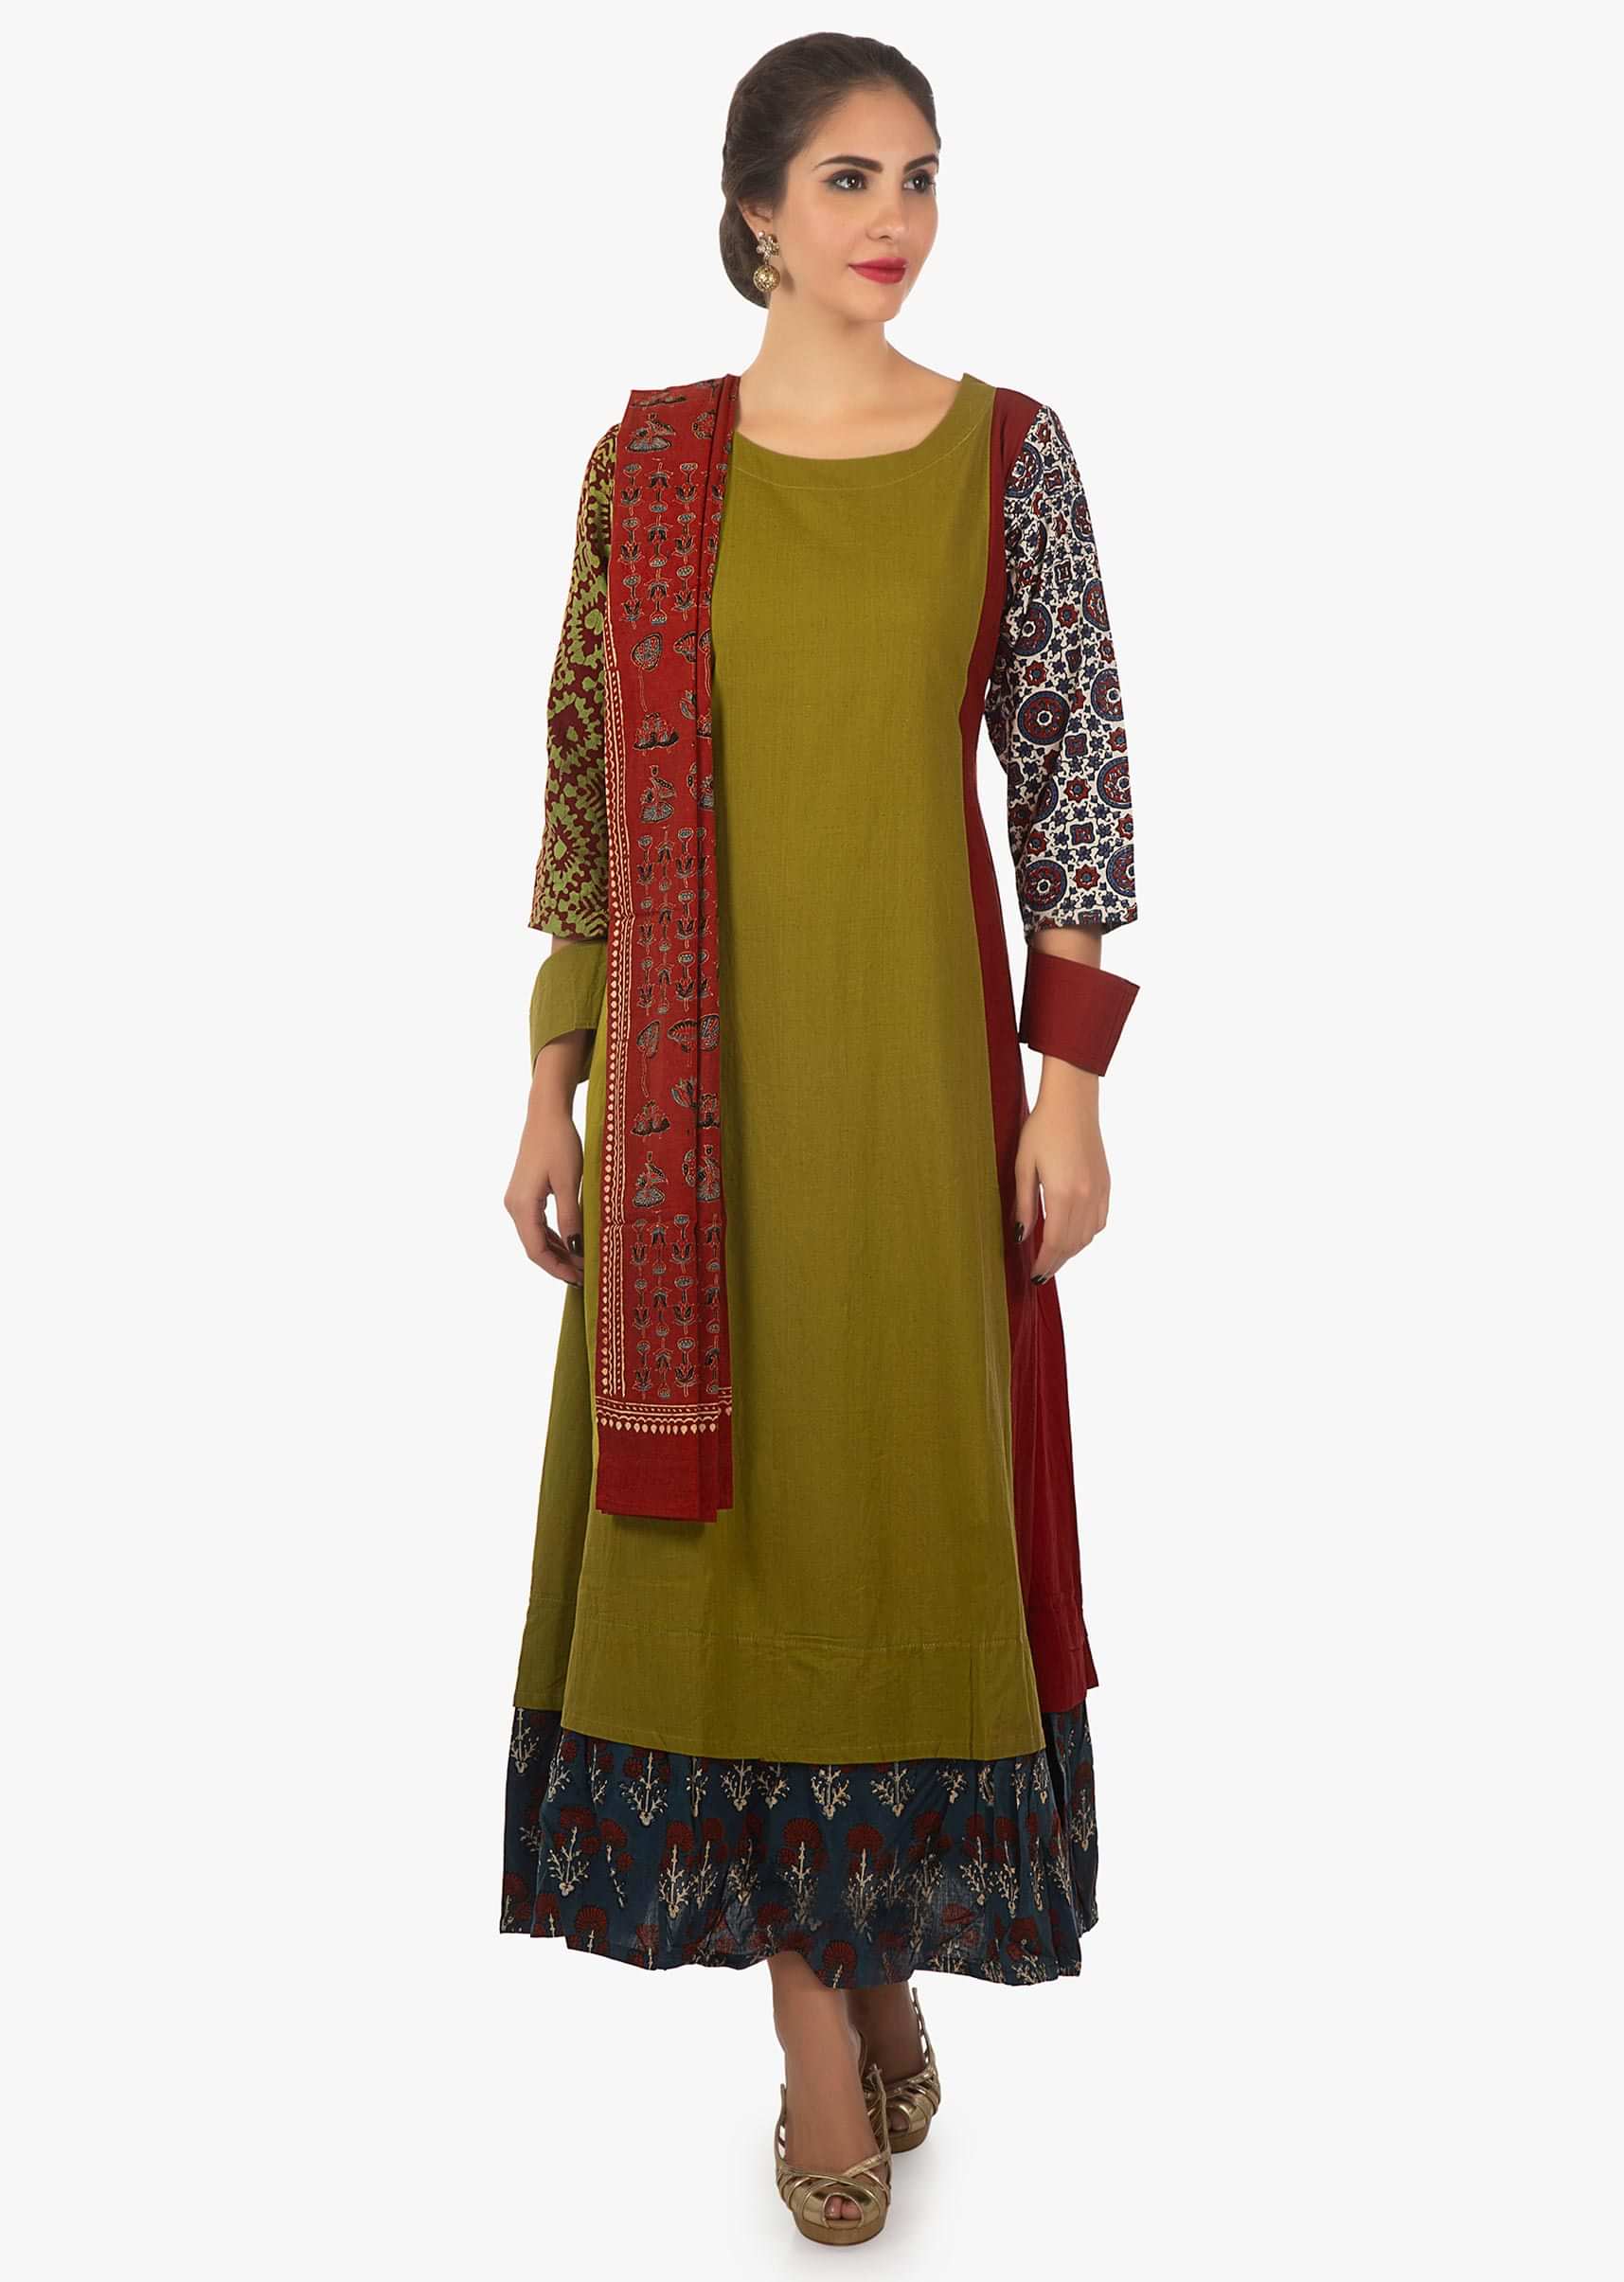 Green plain kurti with red side panels